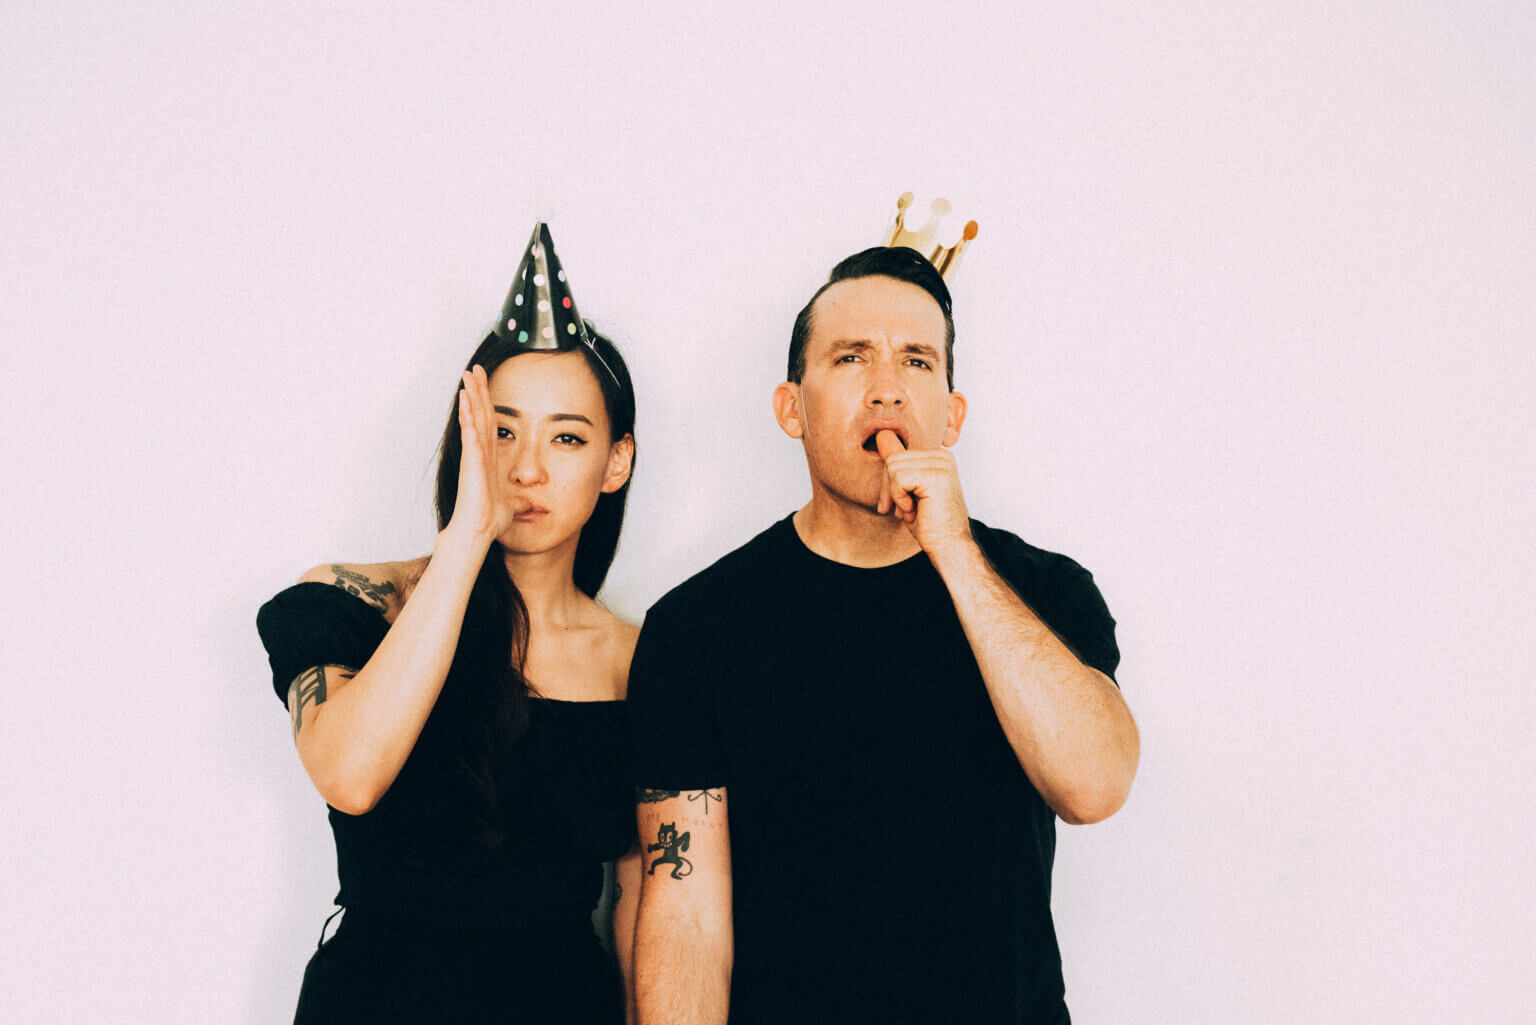 Xiu Xiu shares the video for the title track of OH NO off their album of duets, available now via Polyvinyl. The compilation of various